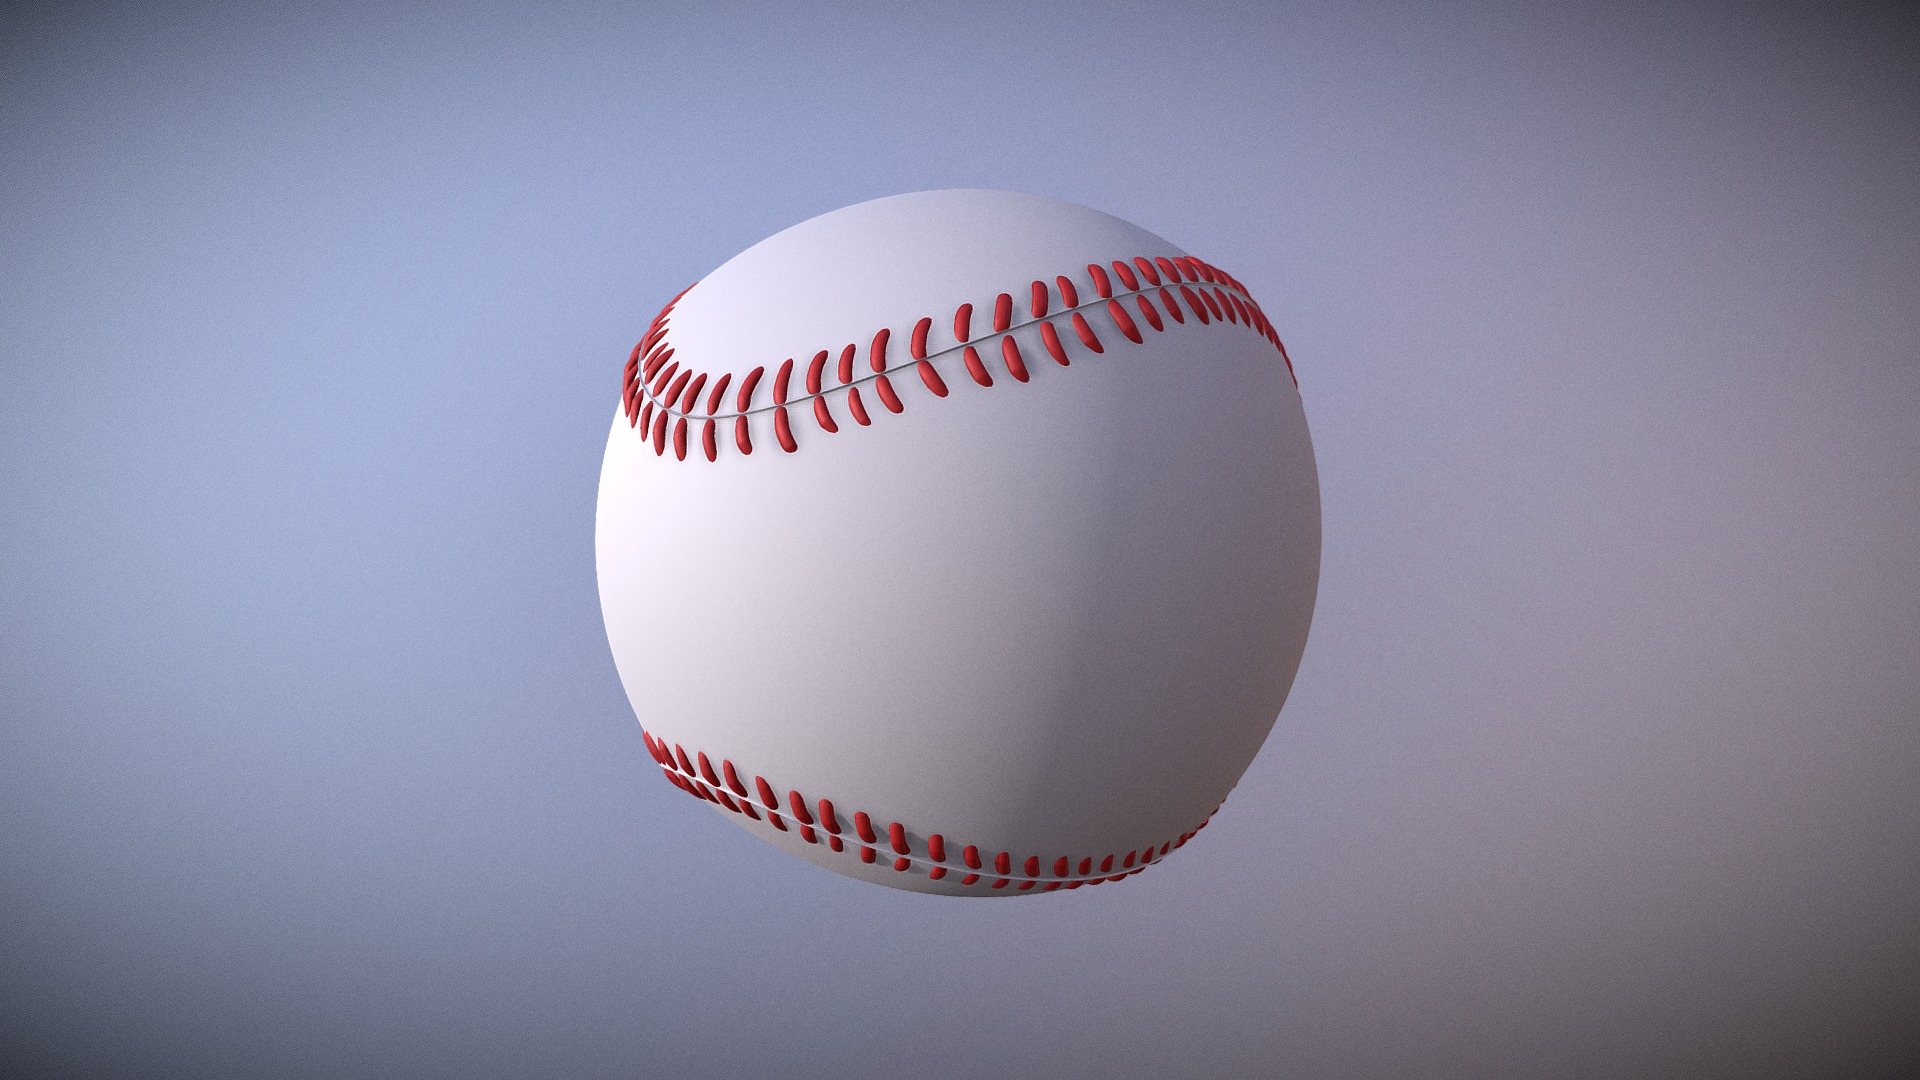 3D model Baseball - This is a 3D model of the Baseball. The 3D model is about a baseball on a white surface.